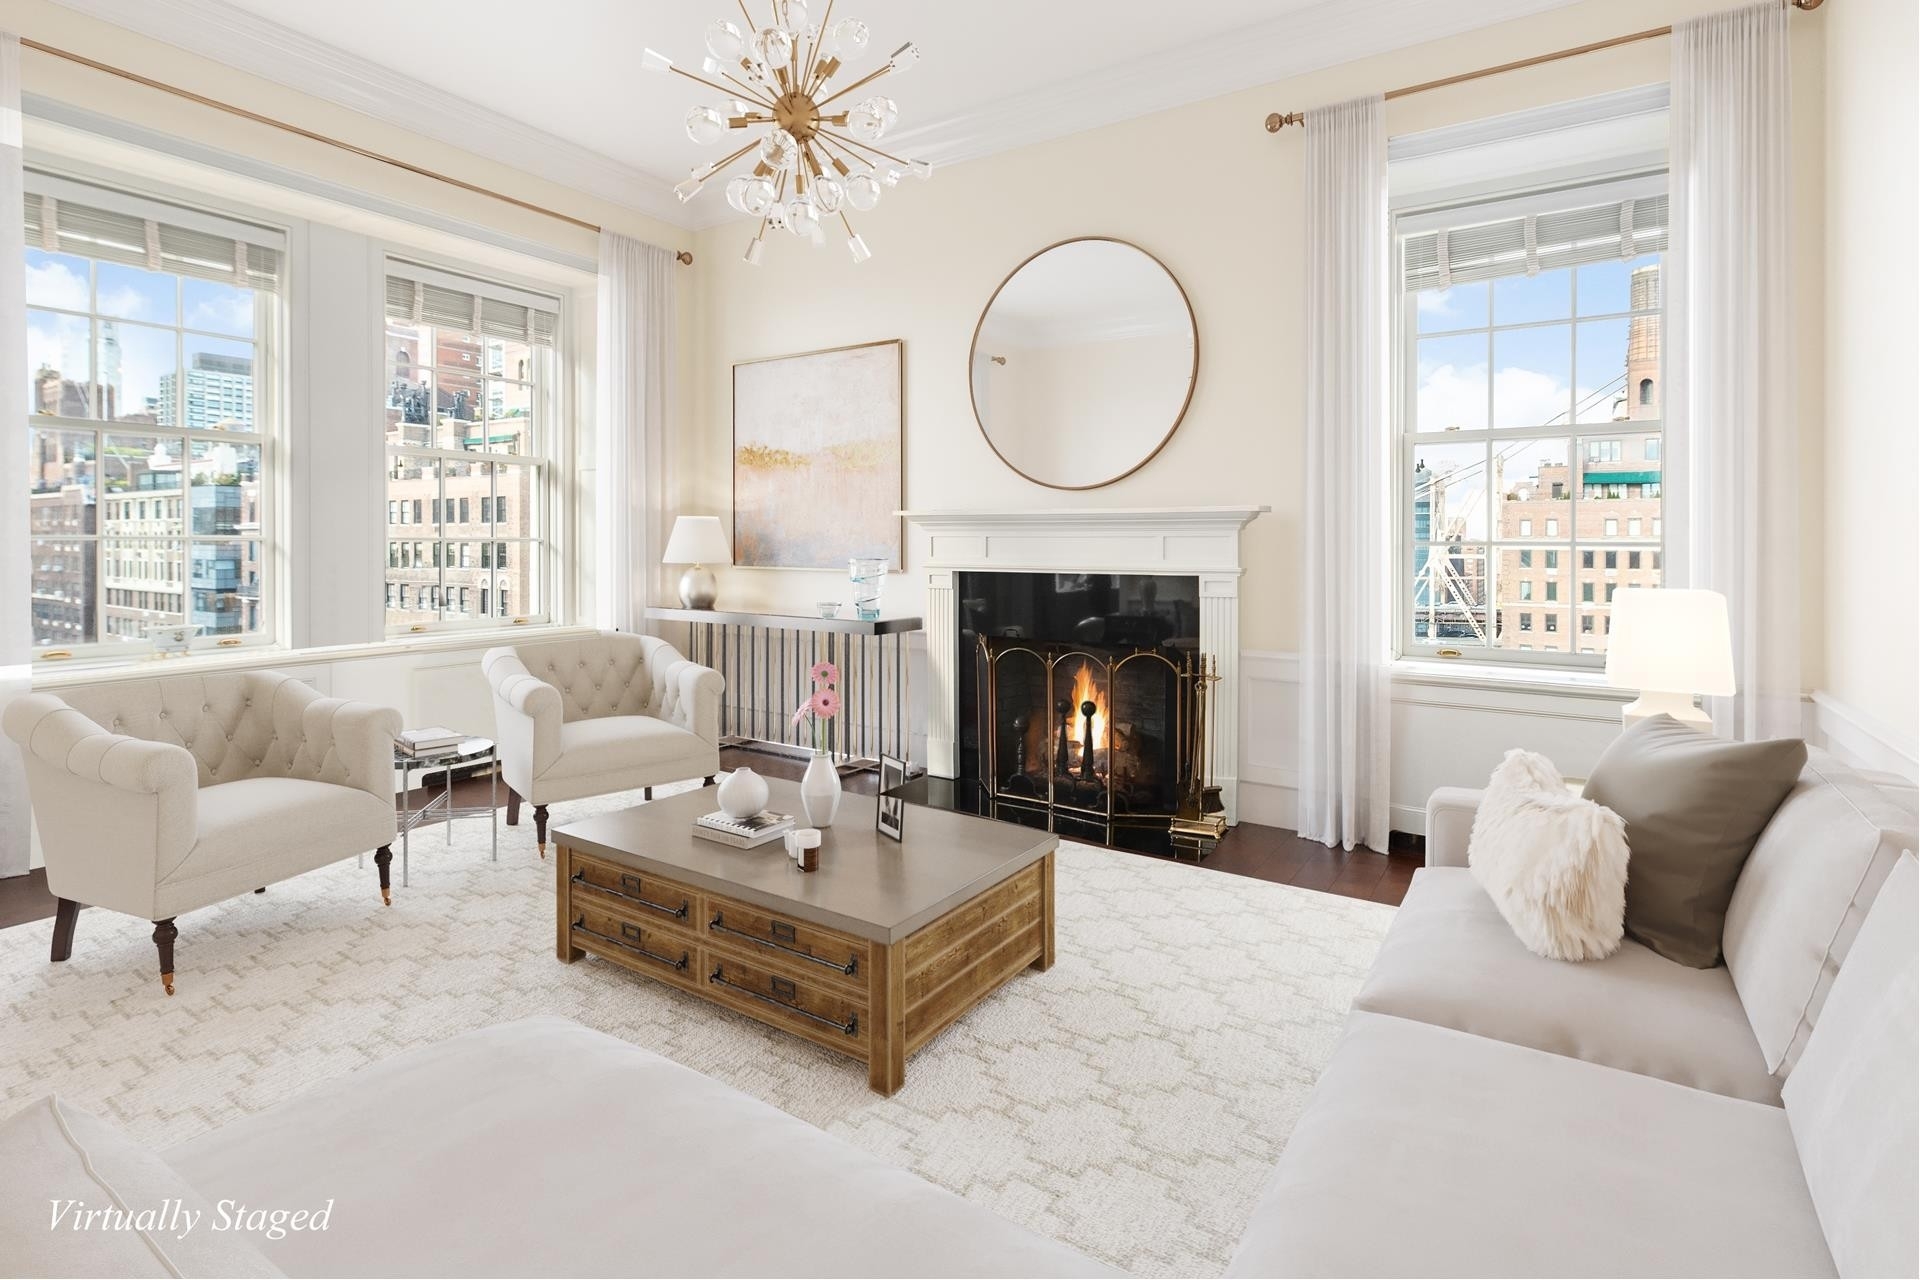 Co-op Properties for Sale at Sutton Place South, 1 SUTTON PL S, 12D Sutton Place, New York, New York 10022